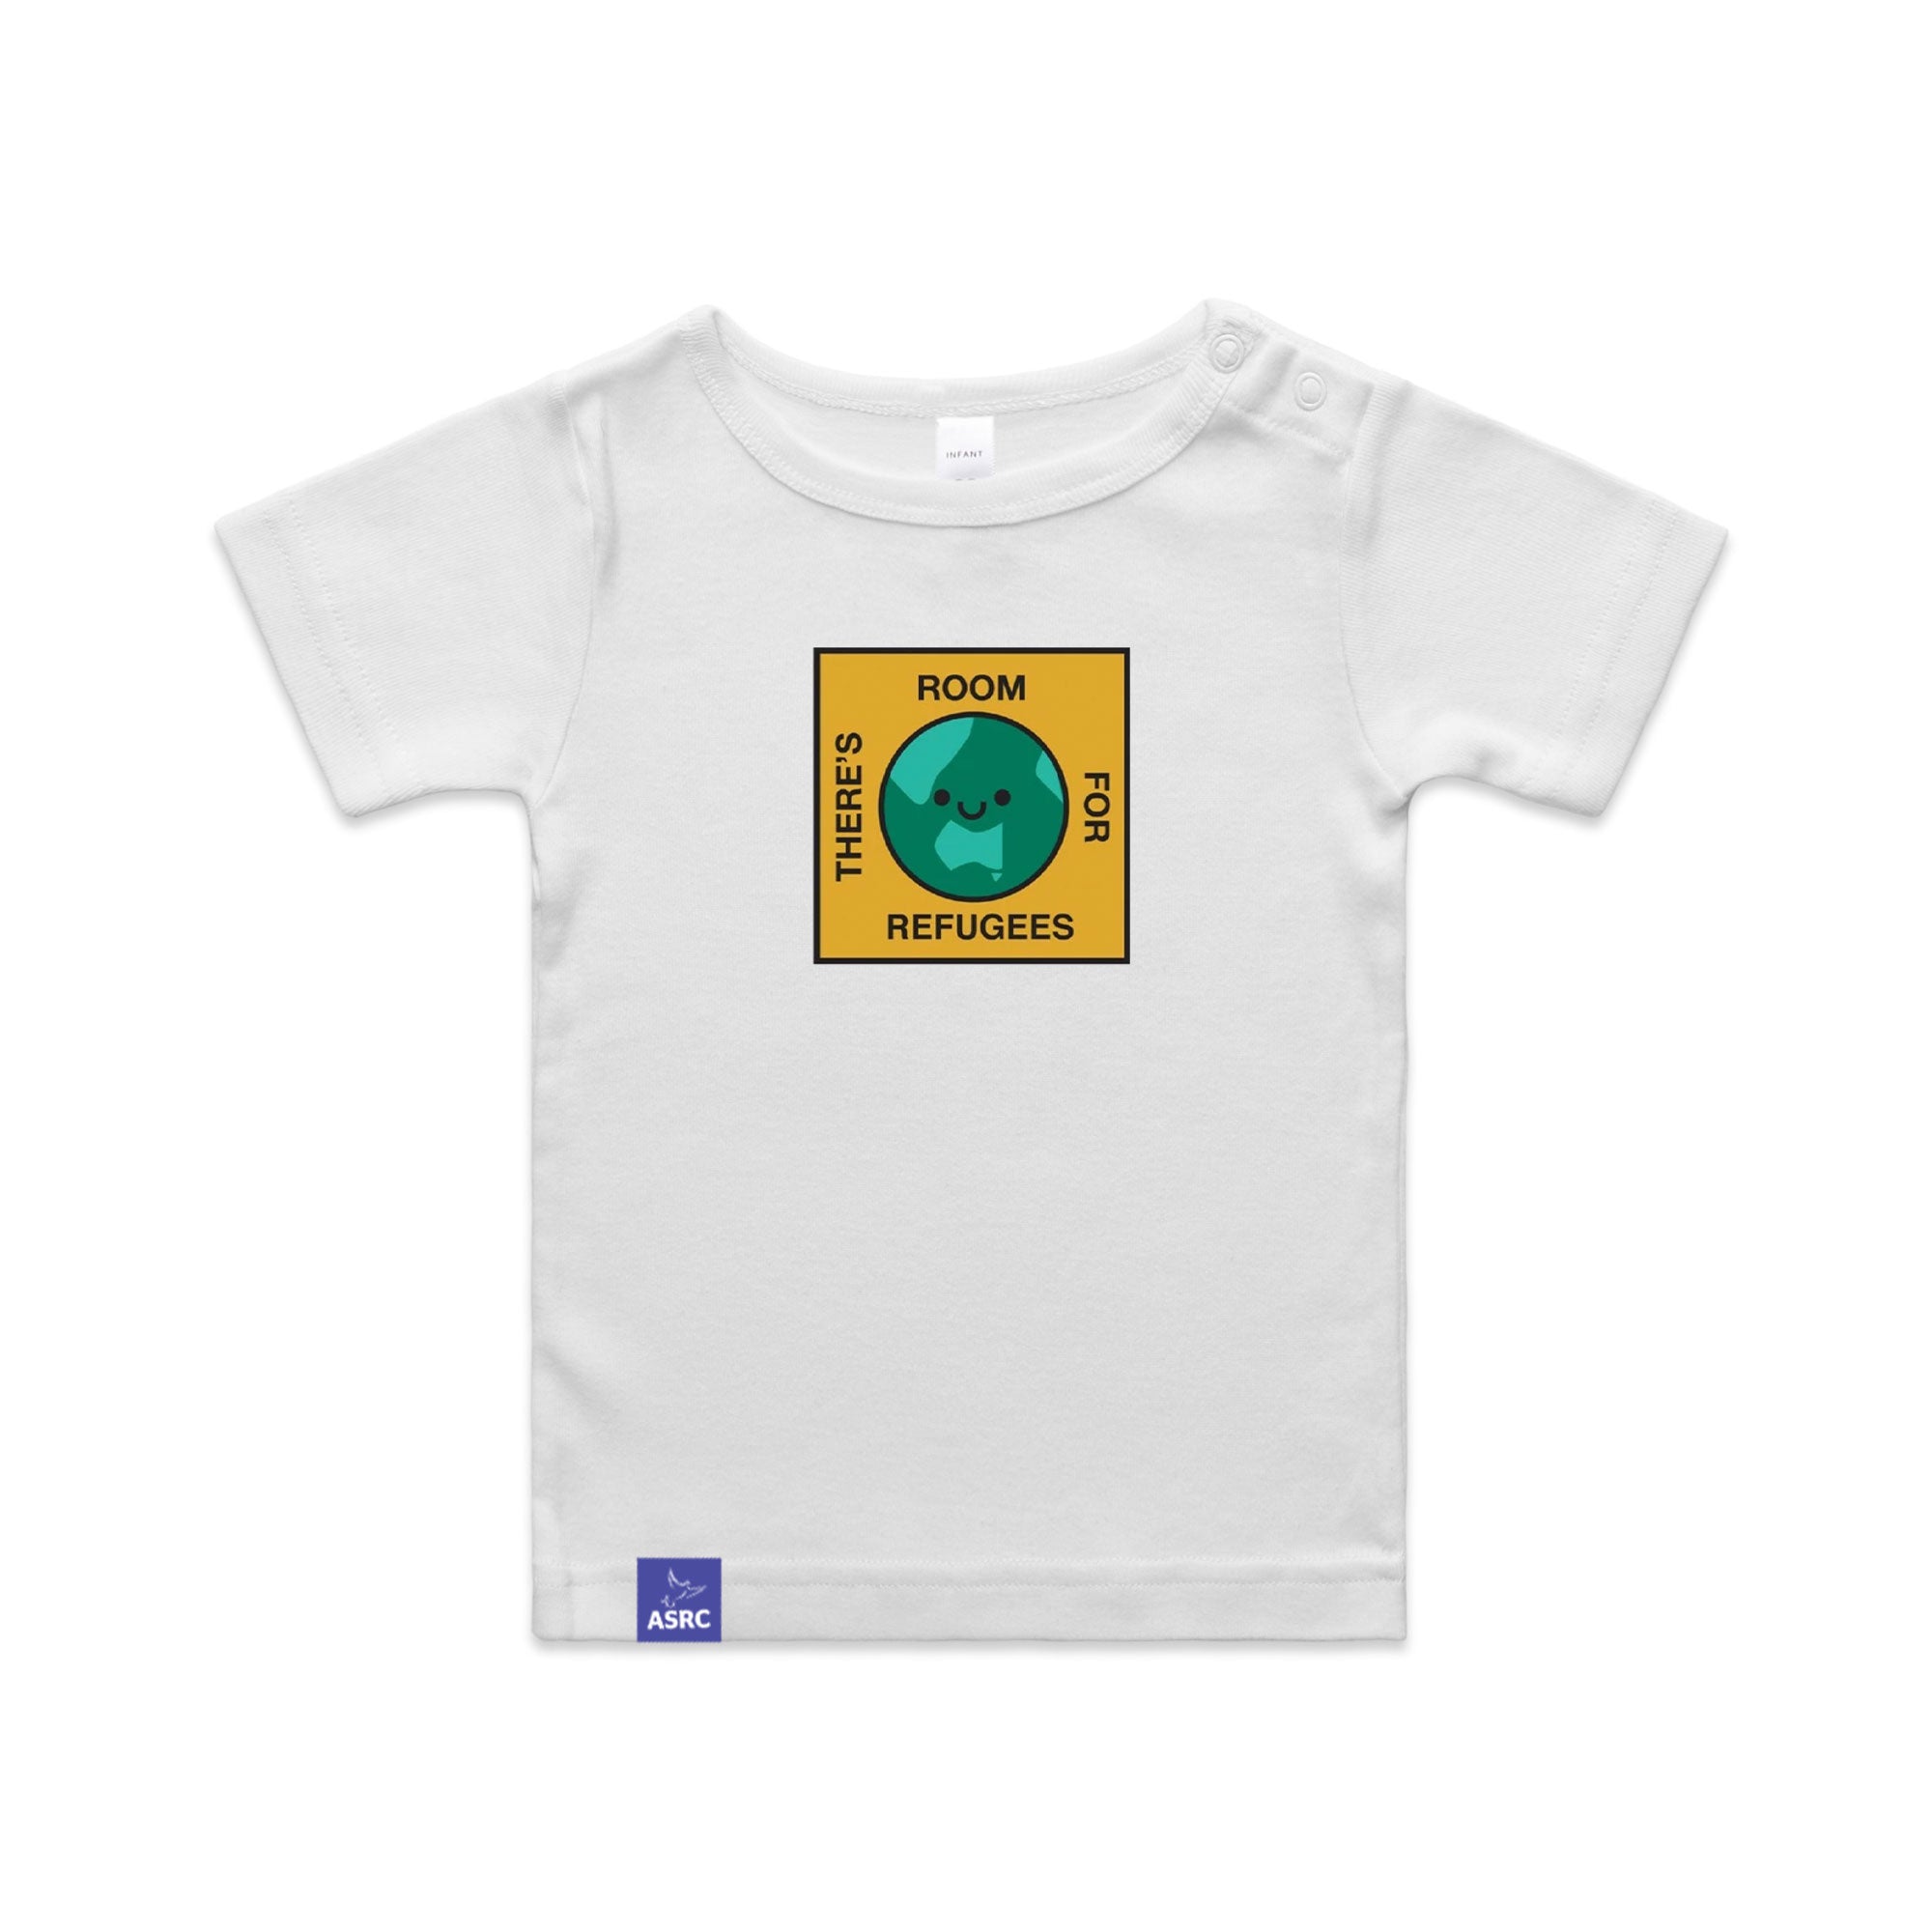 Beci Orpin x ASRC Welcome Wee Tee - Infants (White & Grey)